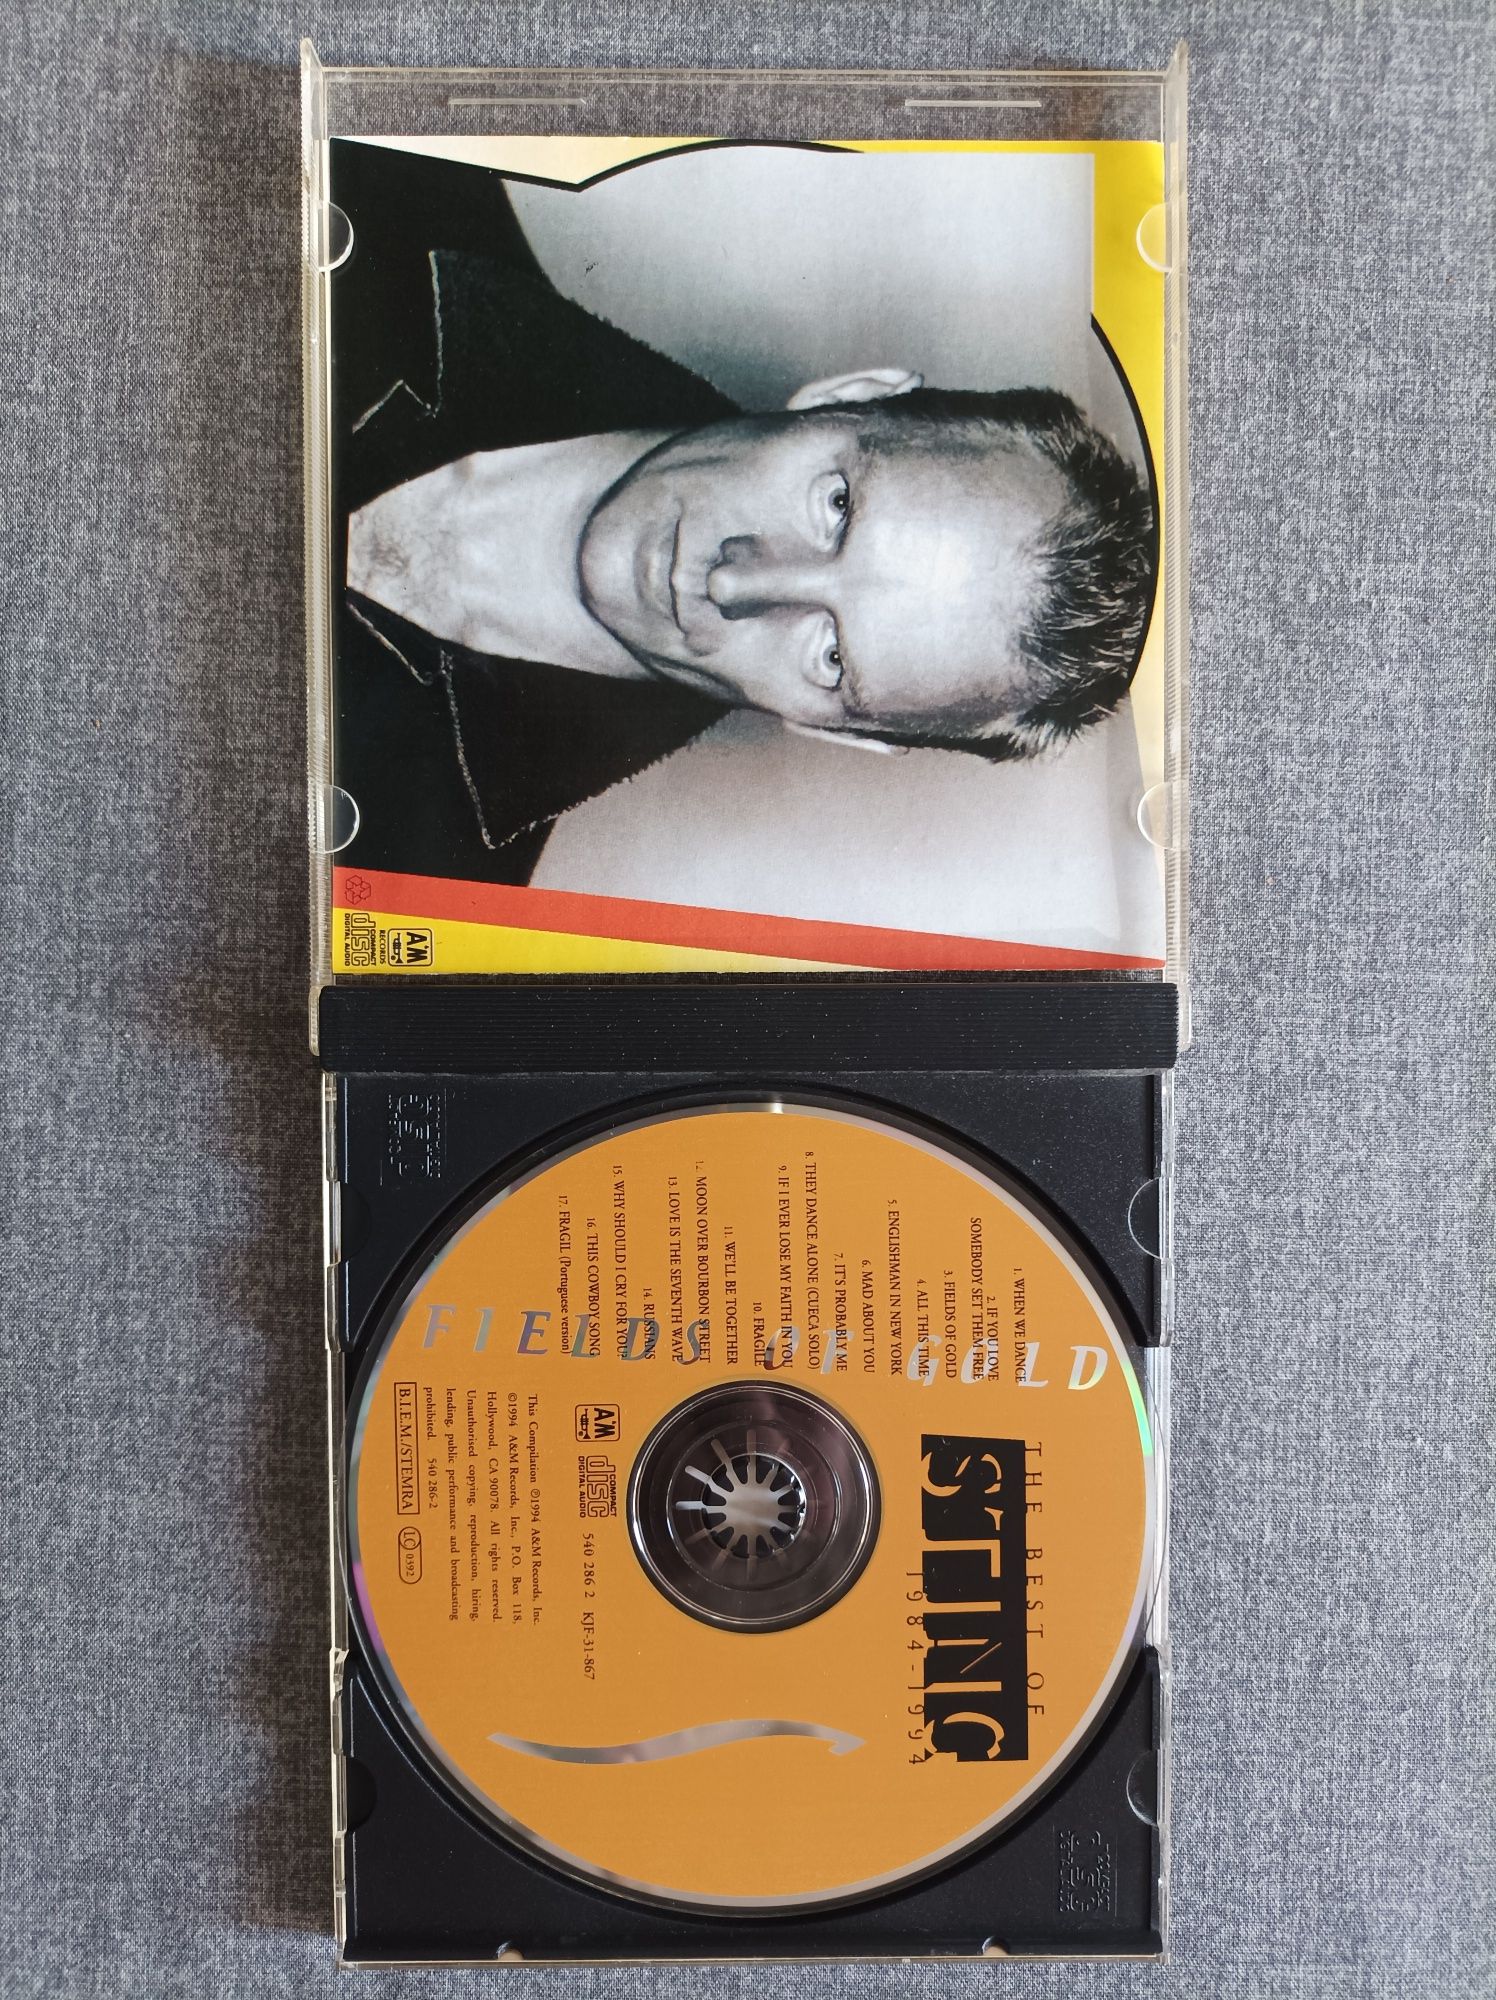 59 - STING - THE BEST OF, Flelds of Gold  TOTO  Mindfields - 2 x CD